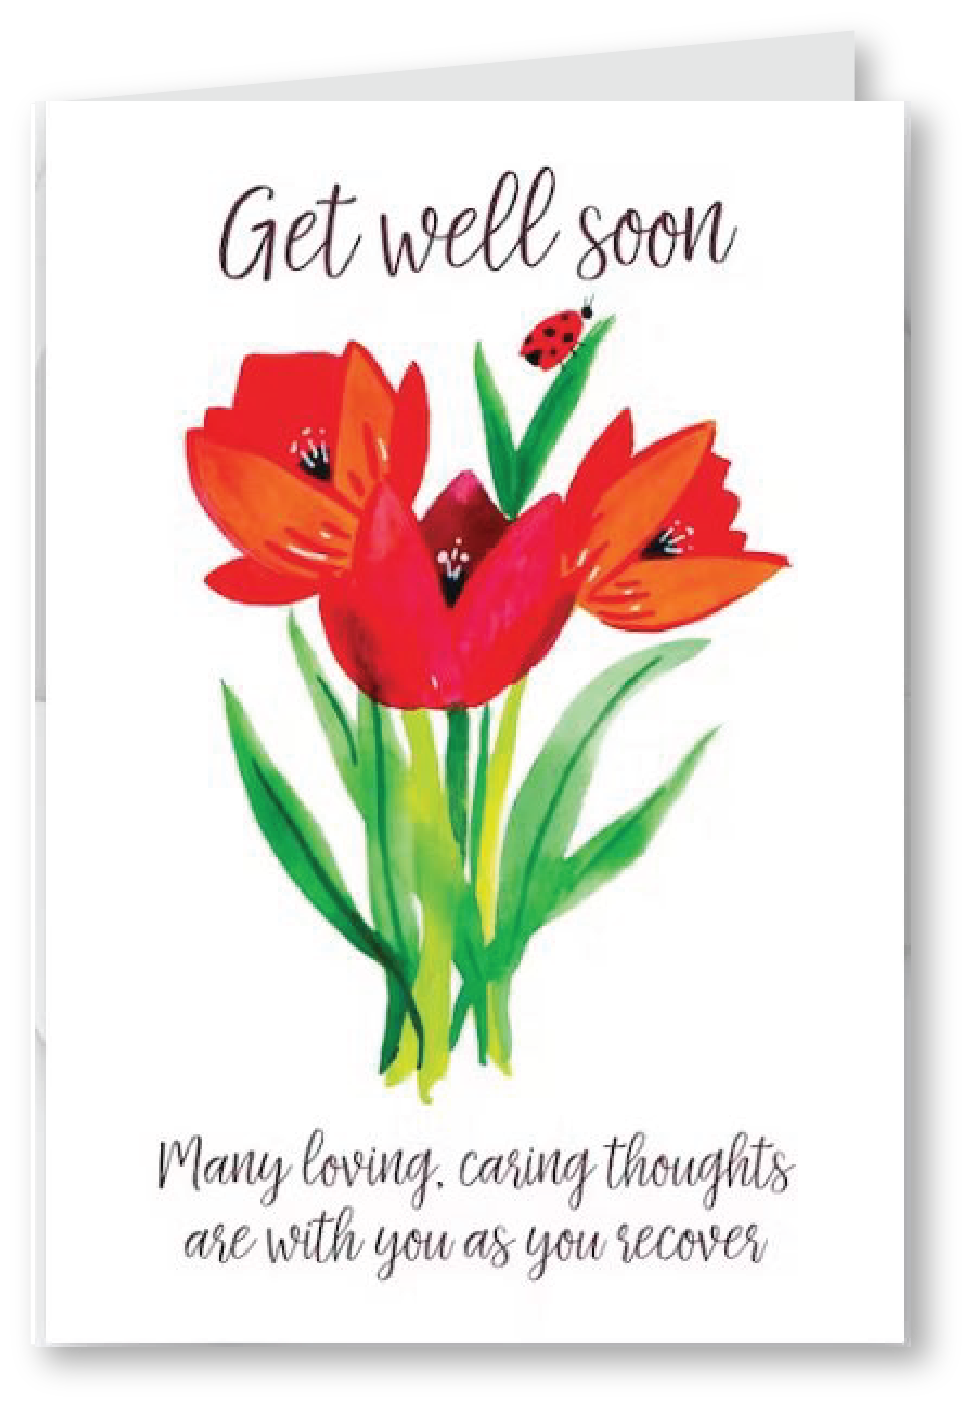 Caring Thoughts- Get Well Soon Card